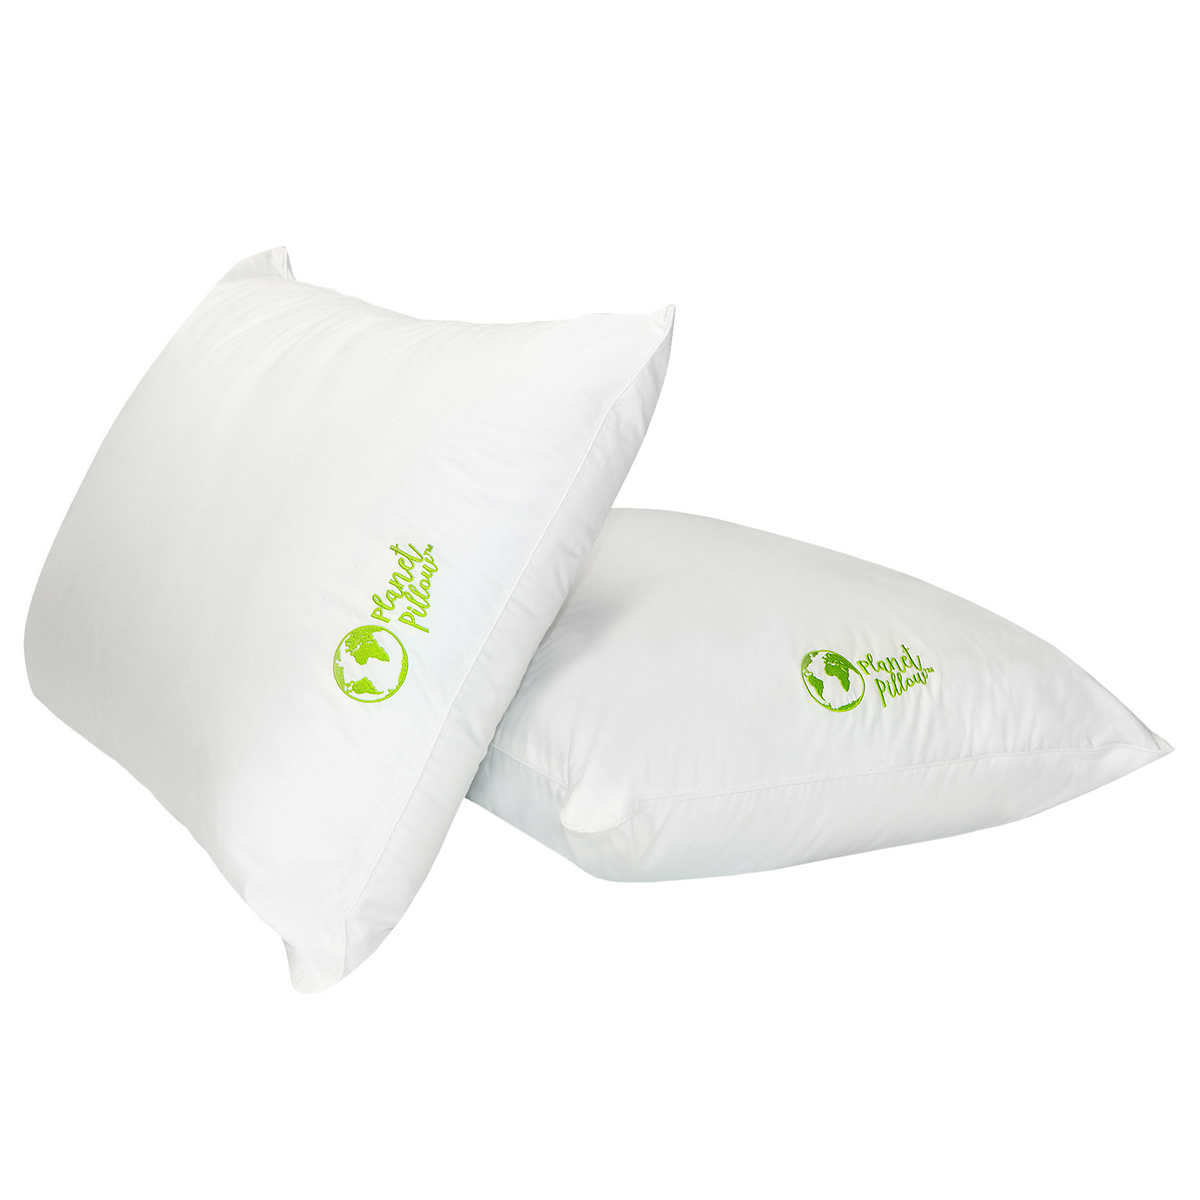 Planet Pillow 2 Pack Costco